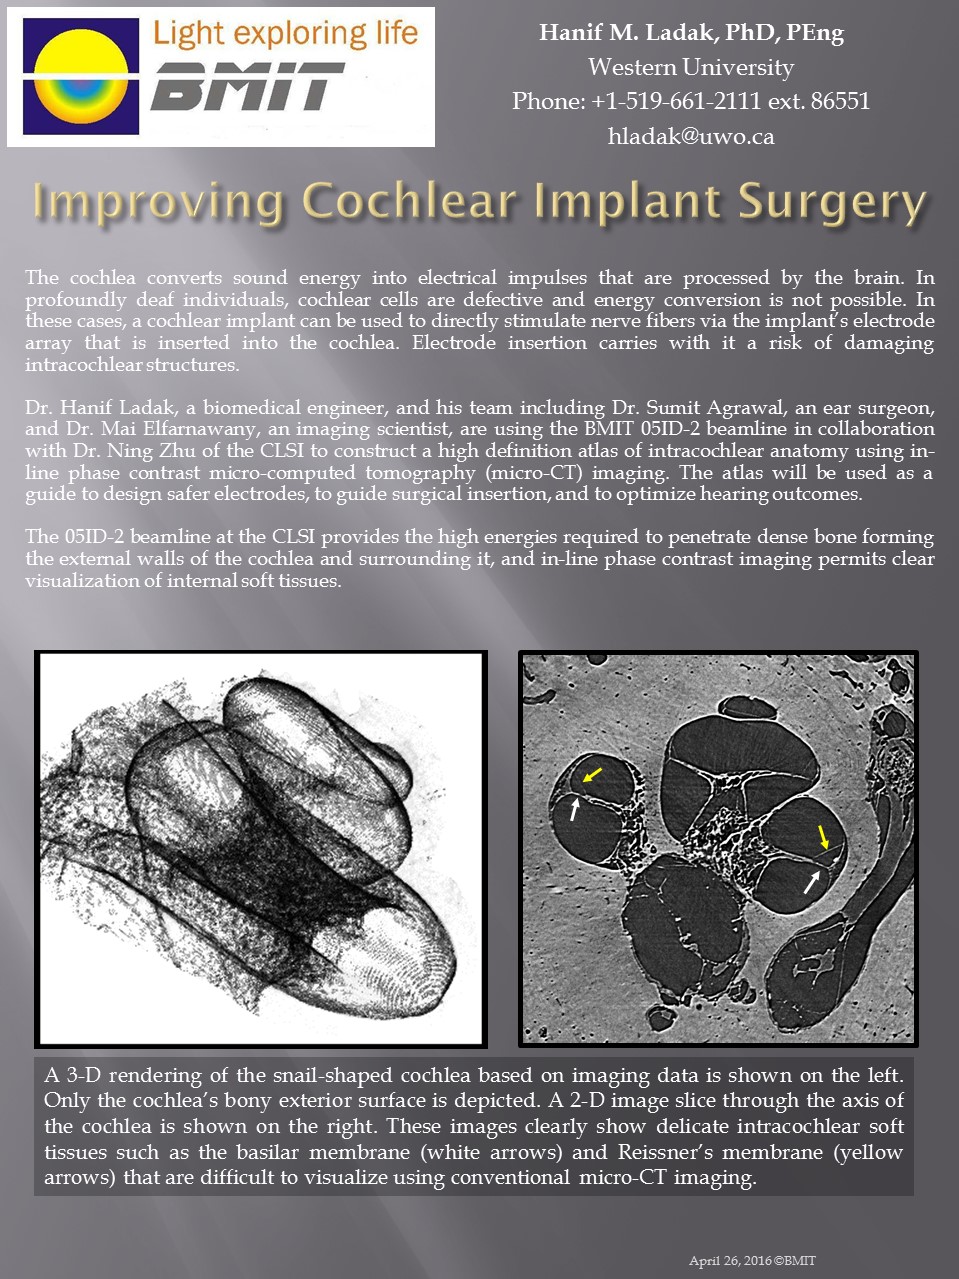 Improving Cochlear Implant Surgery Image